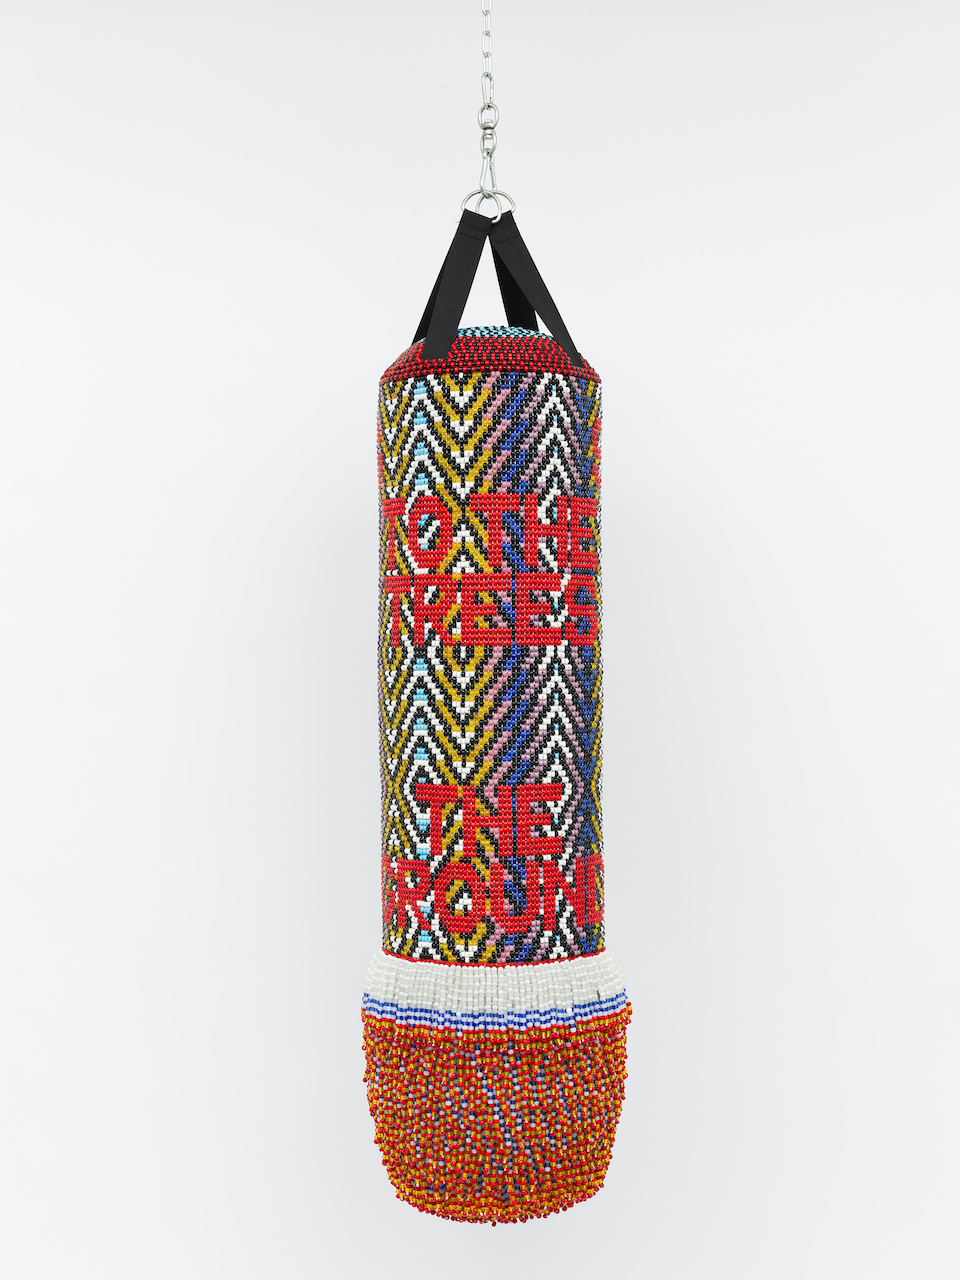 The Wick - Jeffrey Gibson, 'SPEAKING TO THE TREES AND KISSING THE GROUND', 2023. Found punching bag, expanding foam, acrylic felt, glass beads and artificial sinew, 167.6 x 43.2 x 43.2cm (66 x 17 x 17in). Copyright Jeffrey Gibson. Courtesy the artist and Stephen Friedman Gallery, London and New York. Photo by Max Yawney.